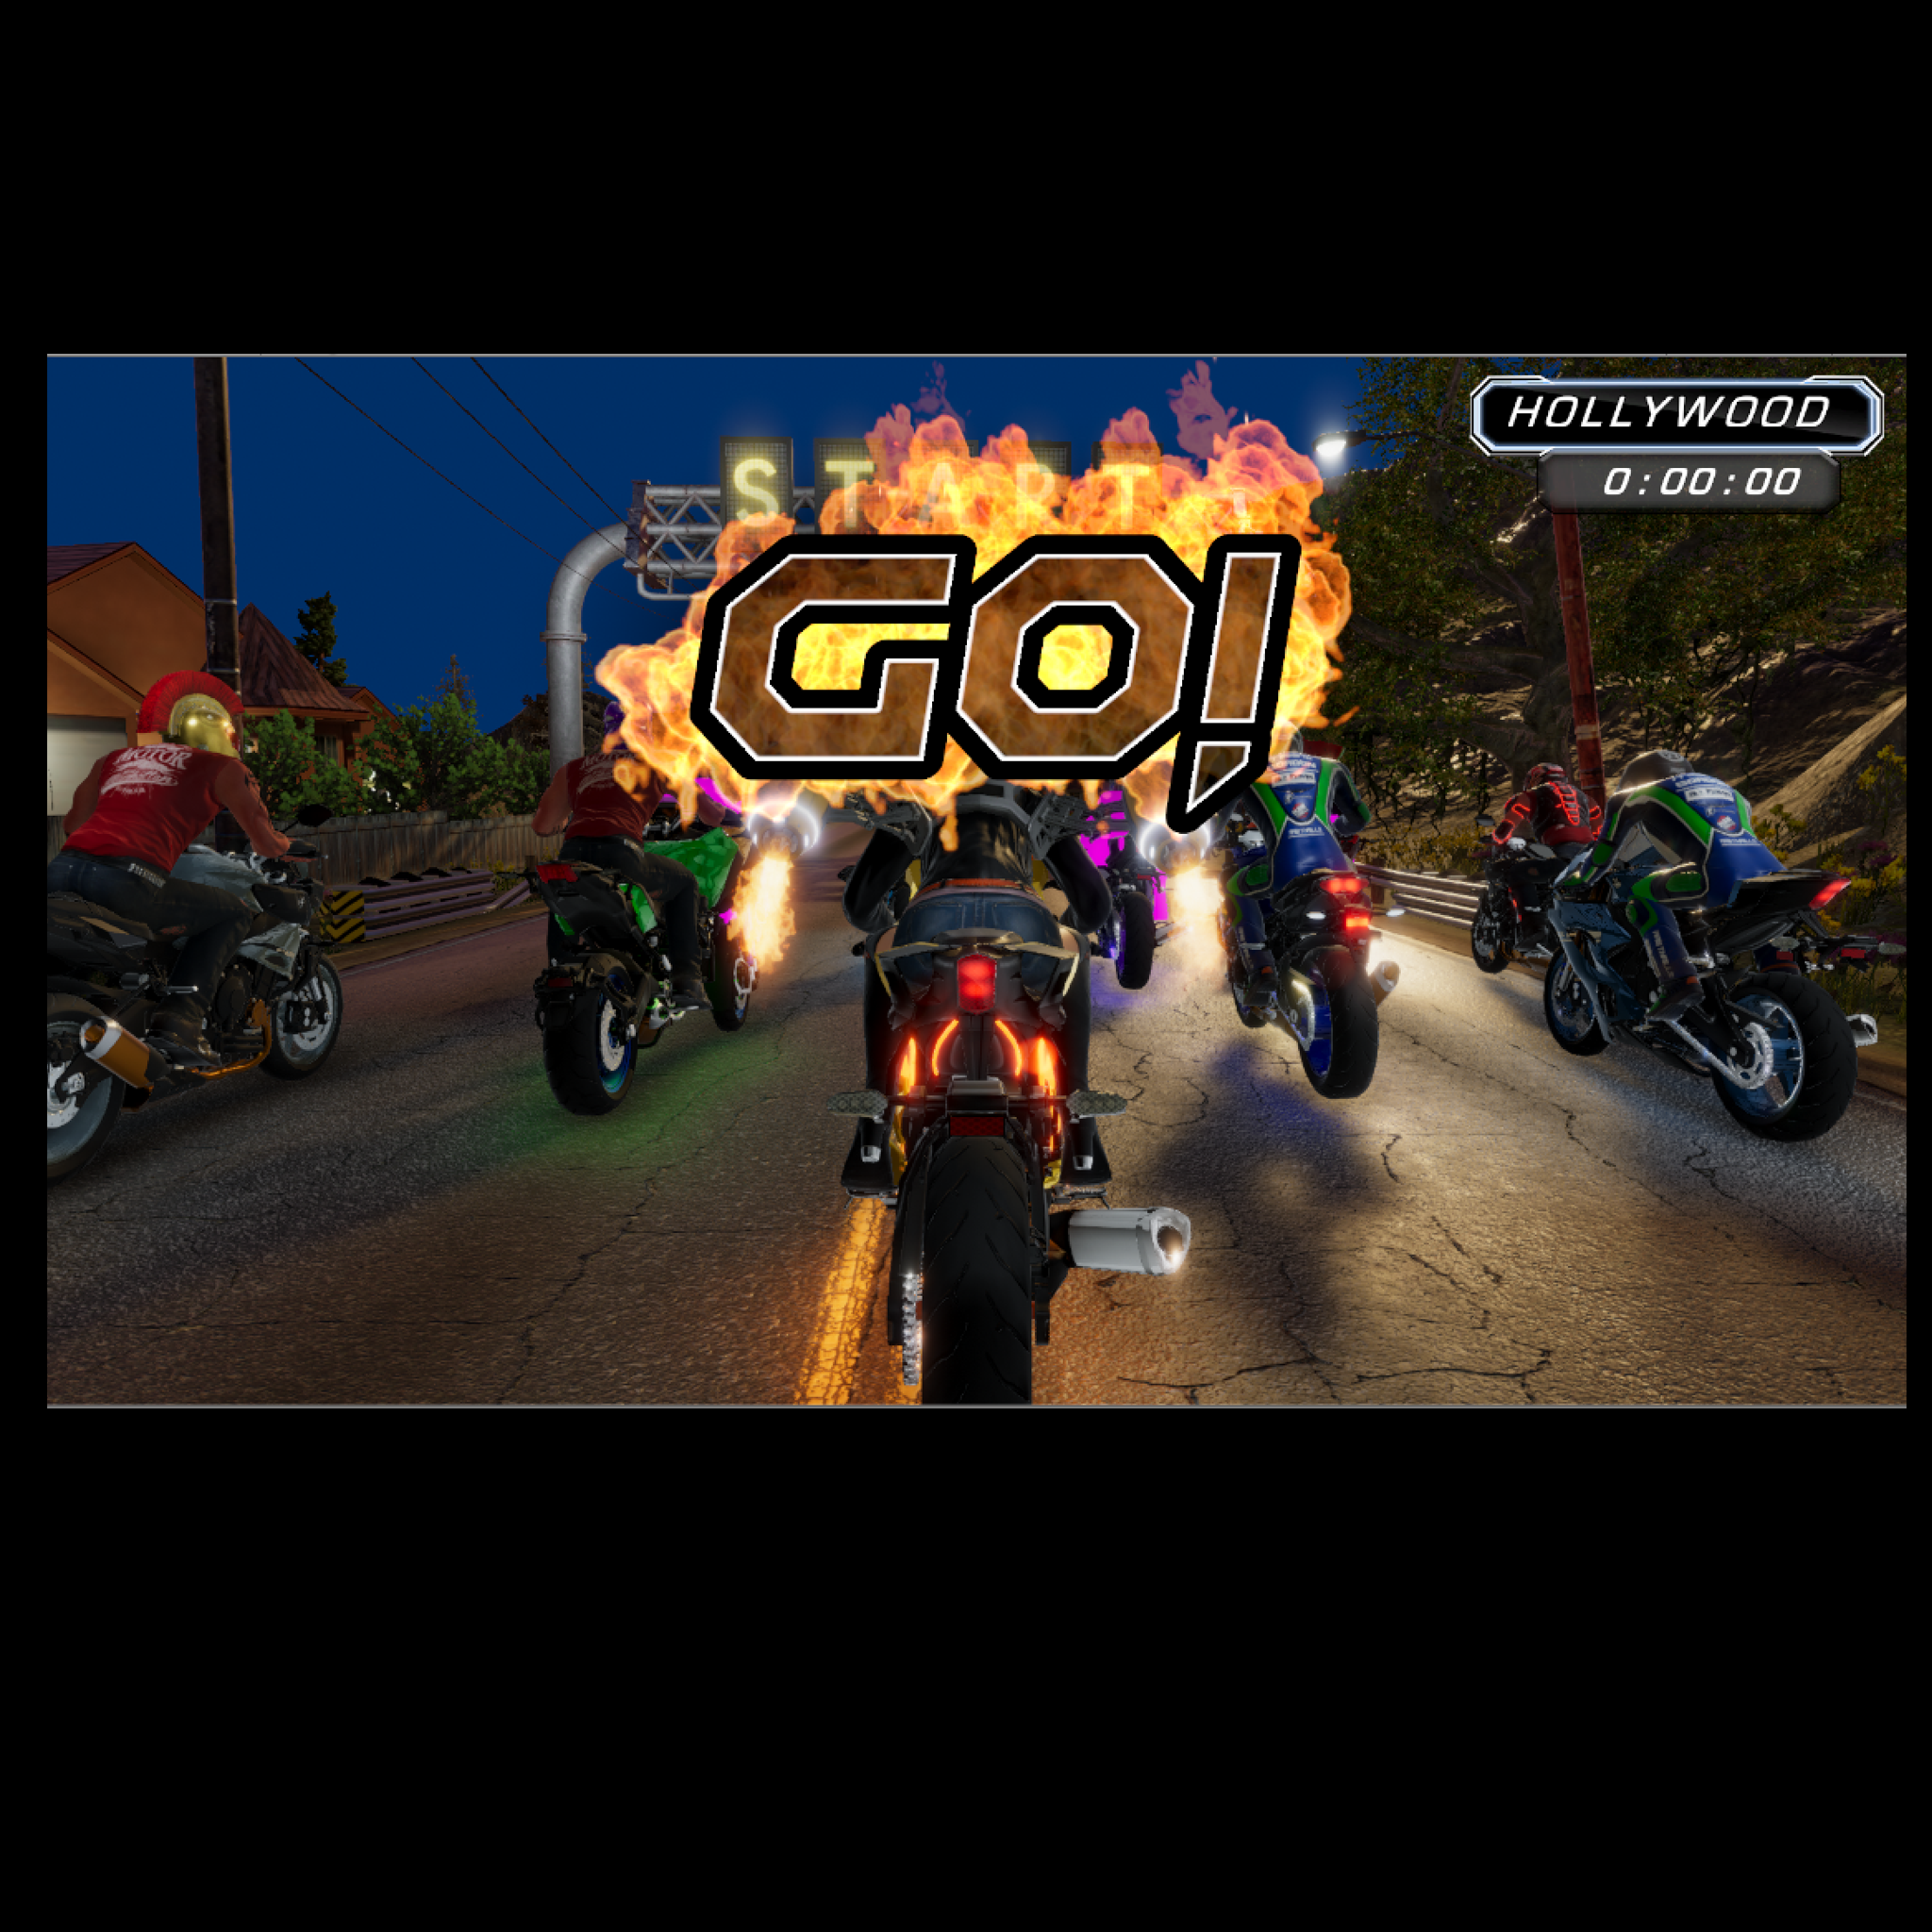 Super Bike 3 Motorcycle Arcade Game by Raw Thrills - Luxury Game Rooms